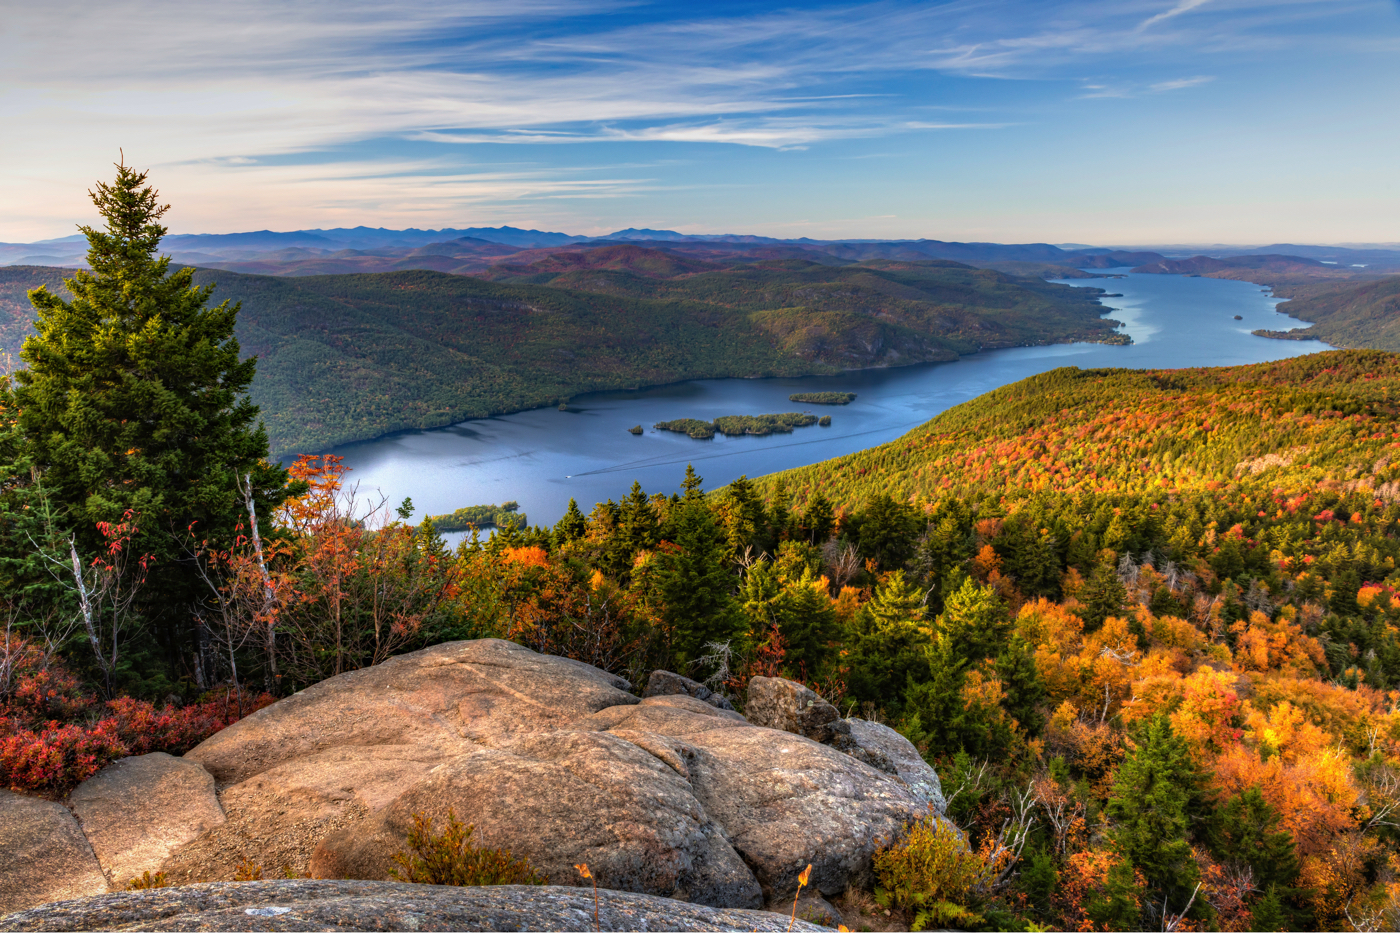 40 BEST THINGS TO DO IN UPSTATE NY YOU CAN'T MISS